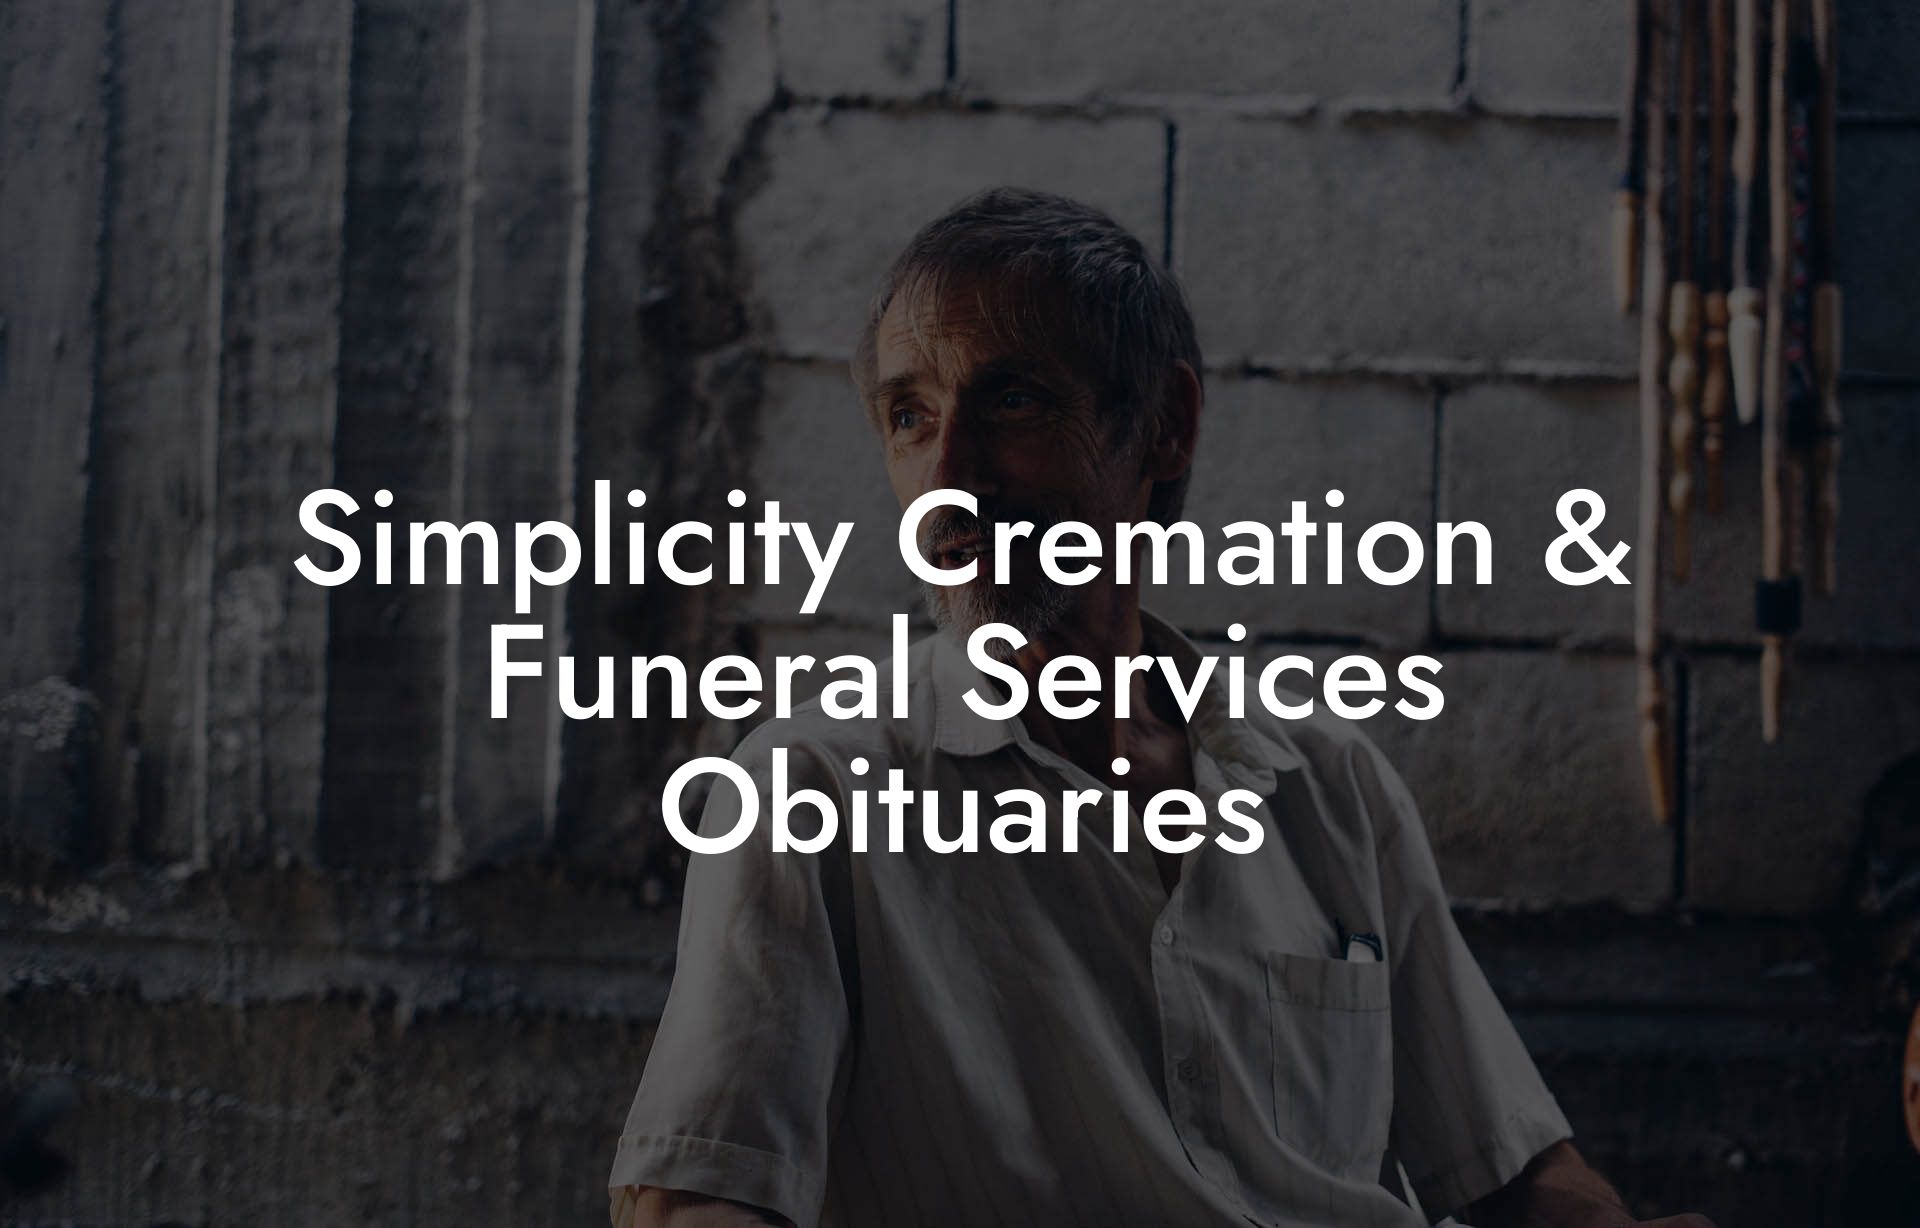 Simplicity Cremation & Funeral Services Obituaries